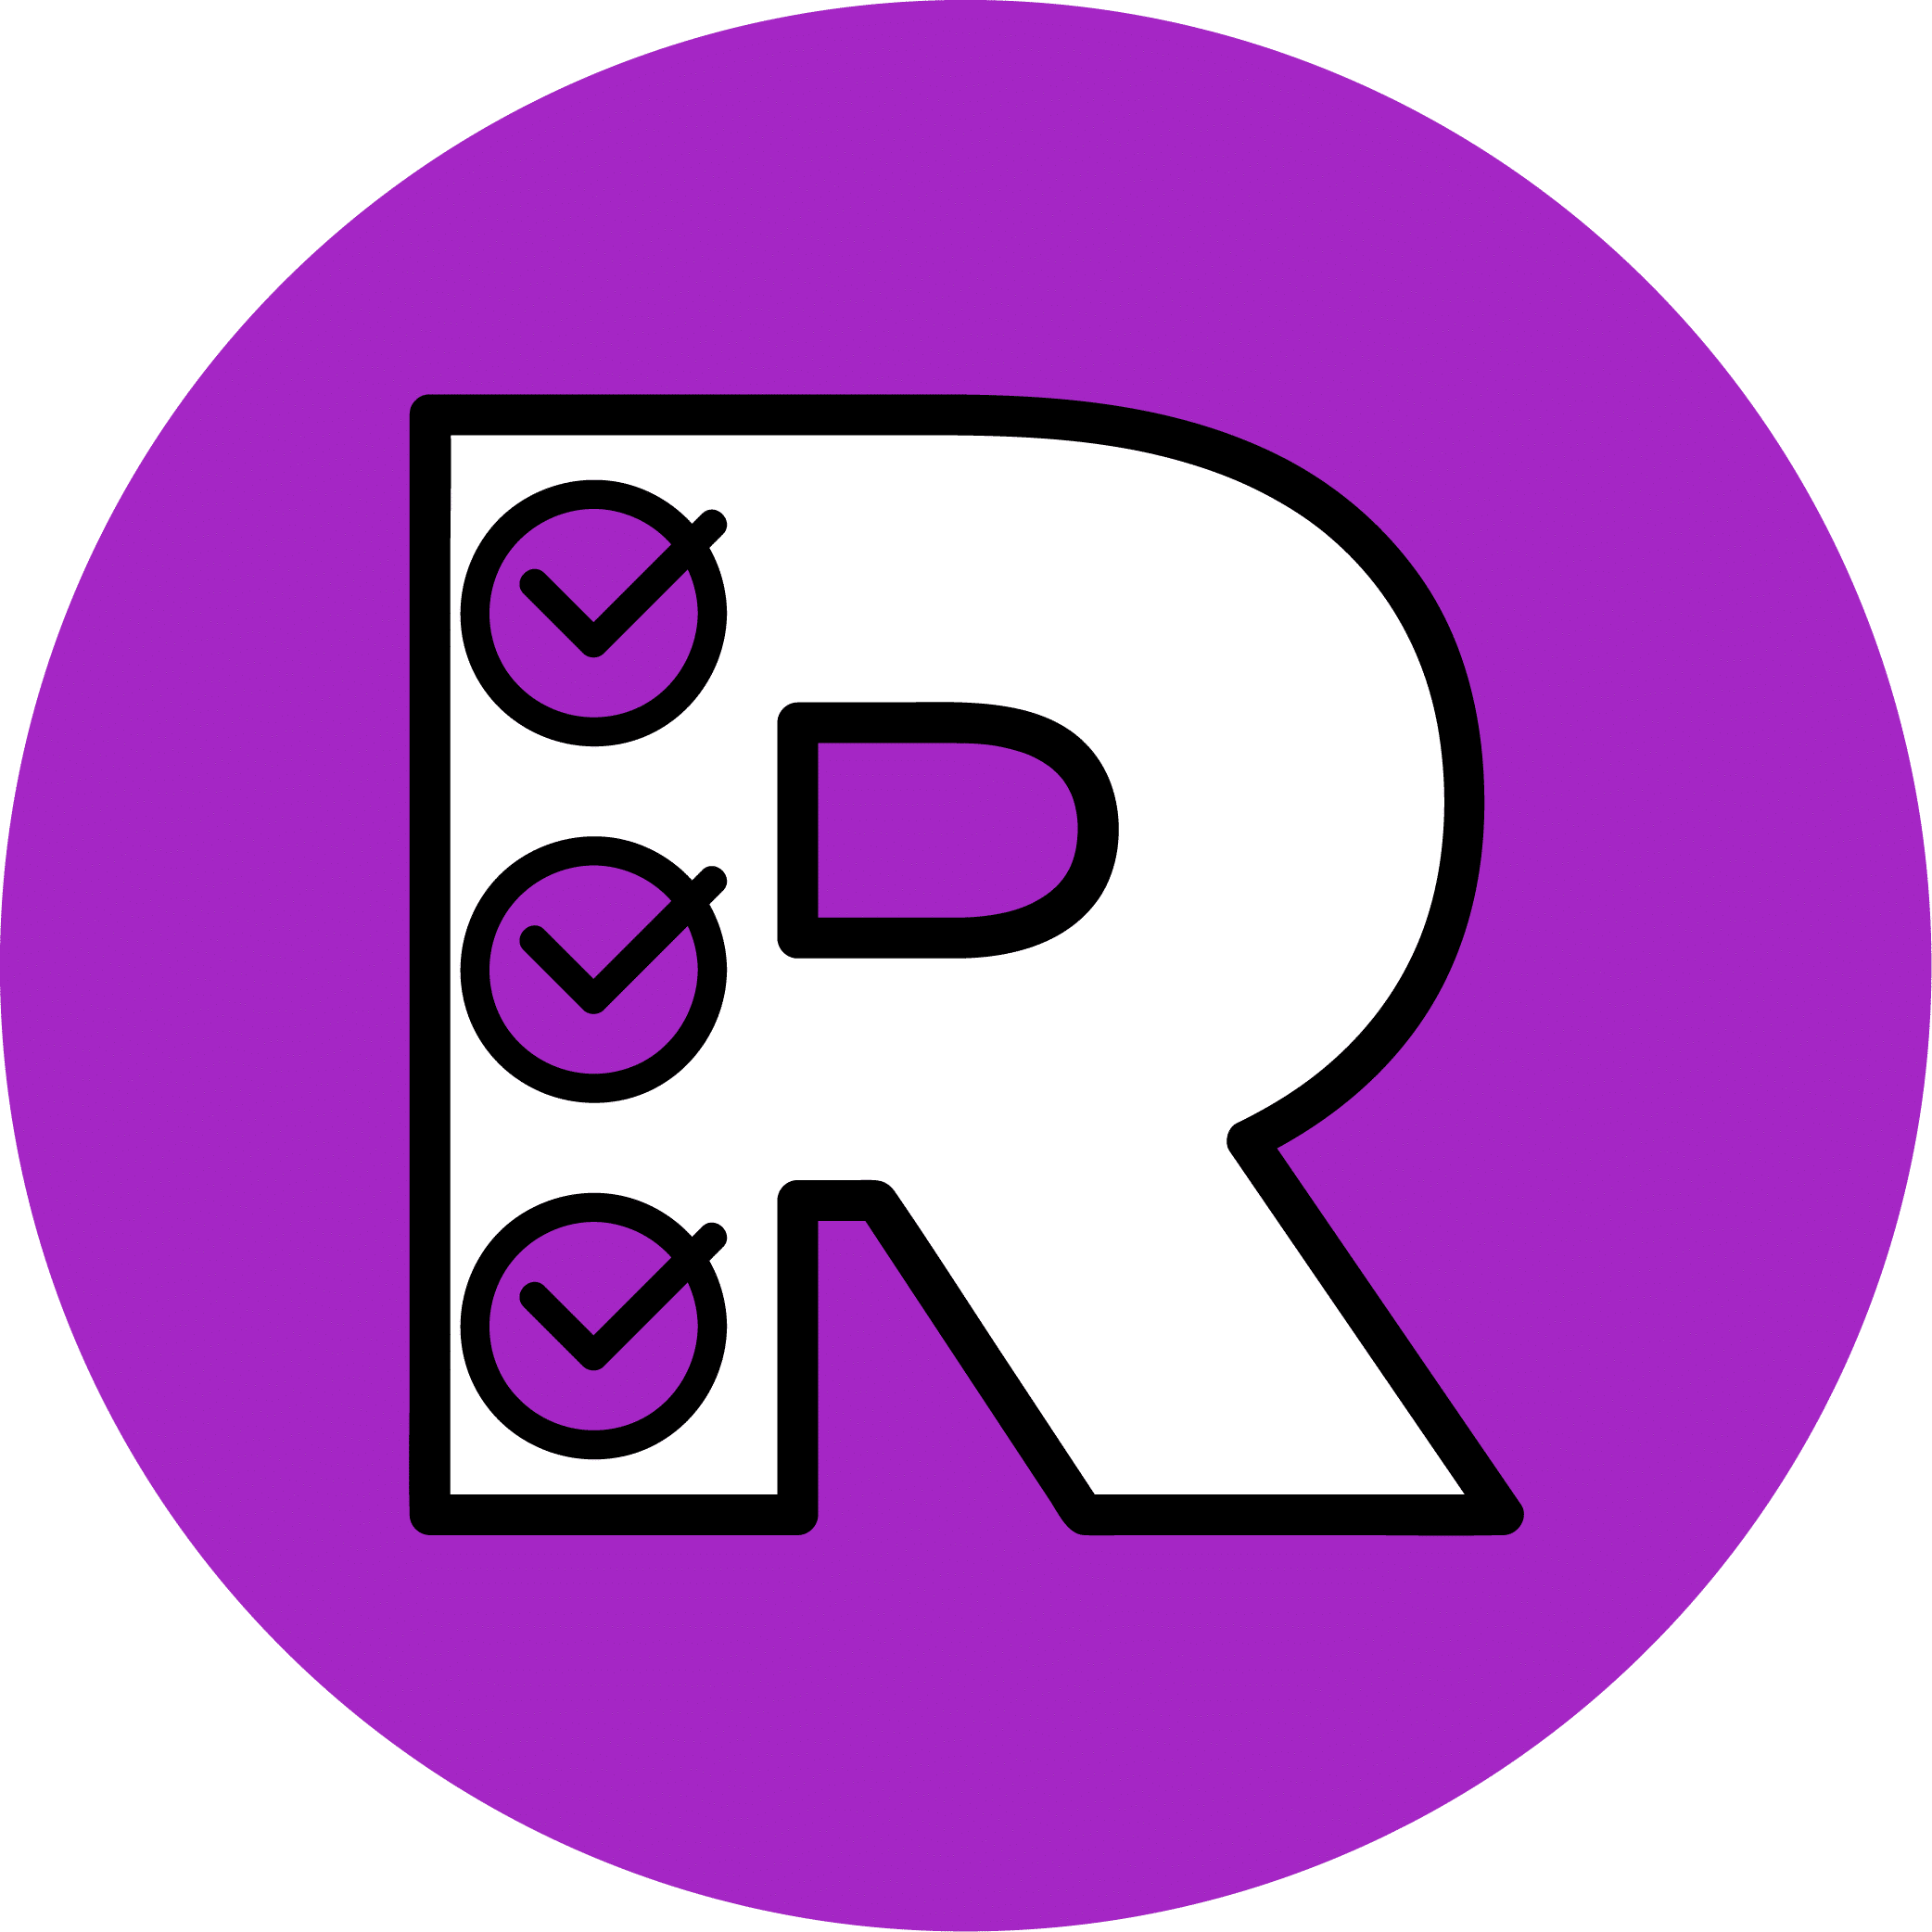 Illustration of an R with checked circles.